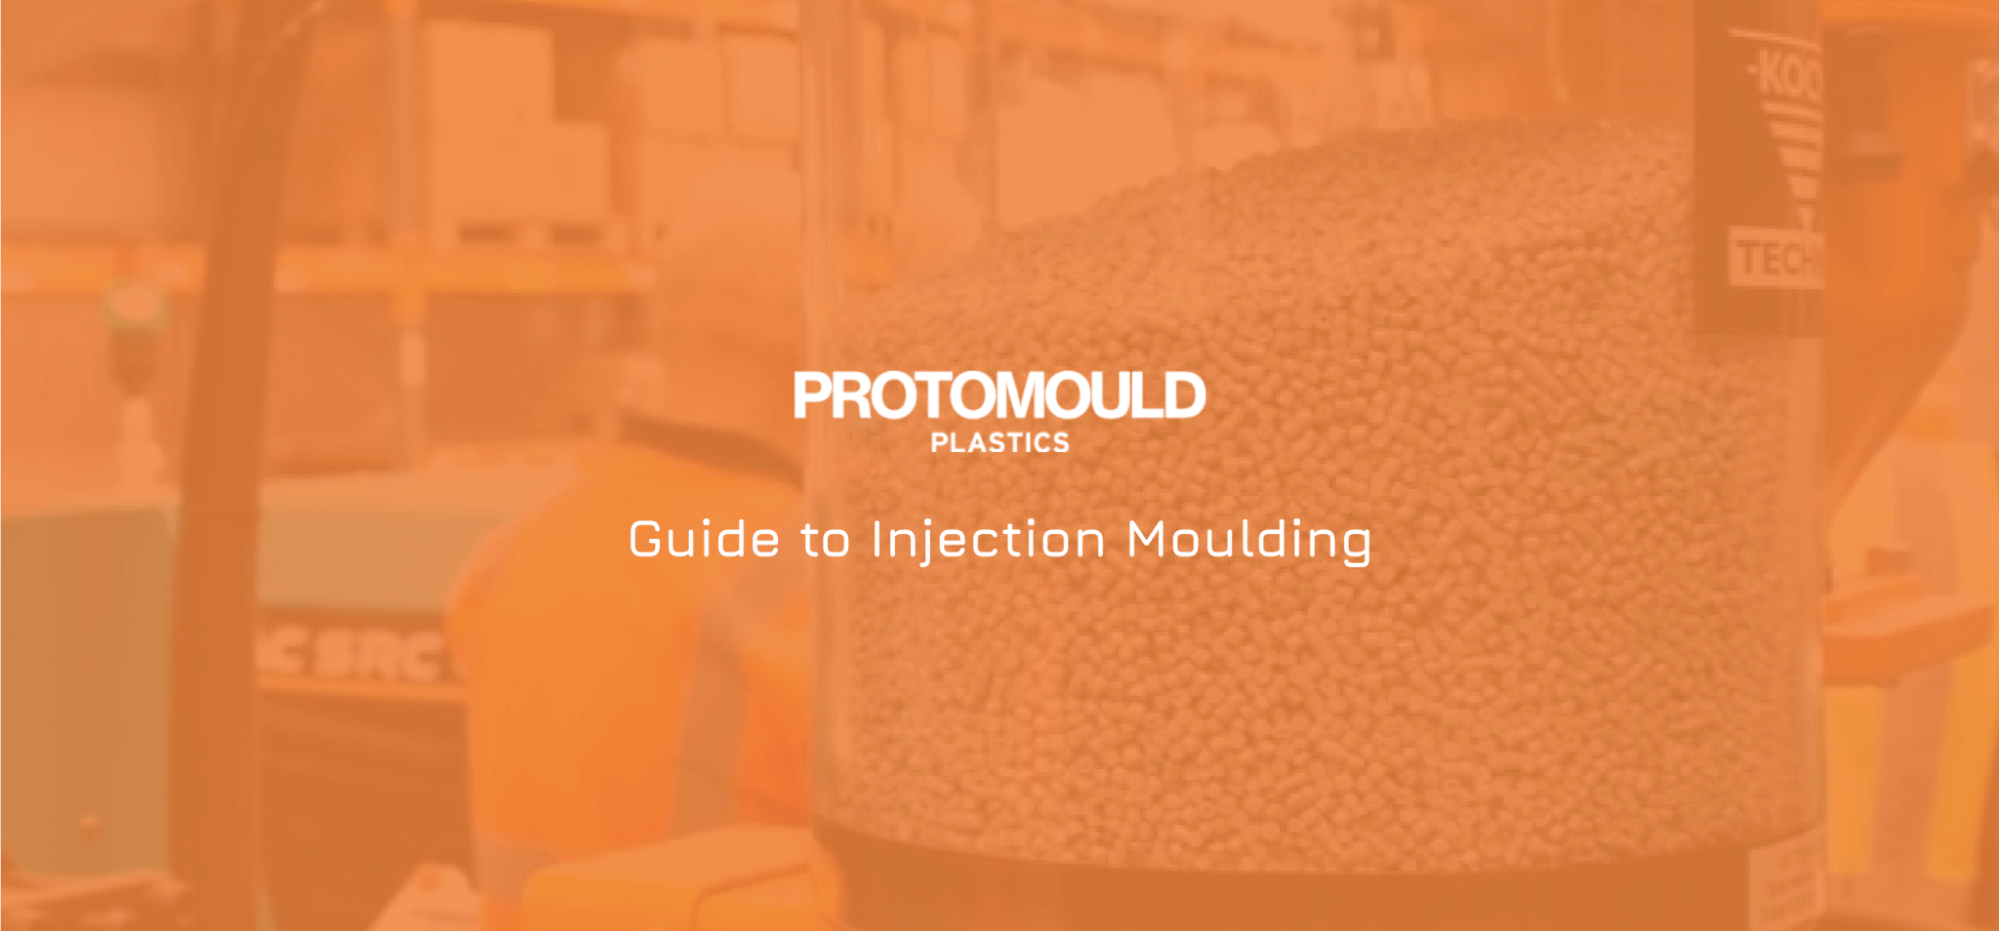 Guide to Injection Moulding